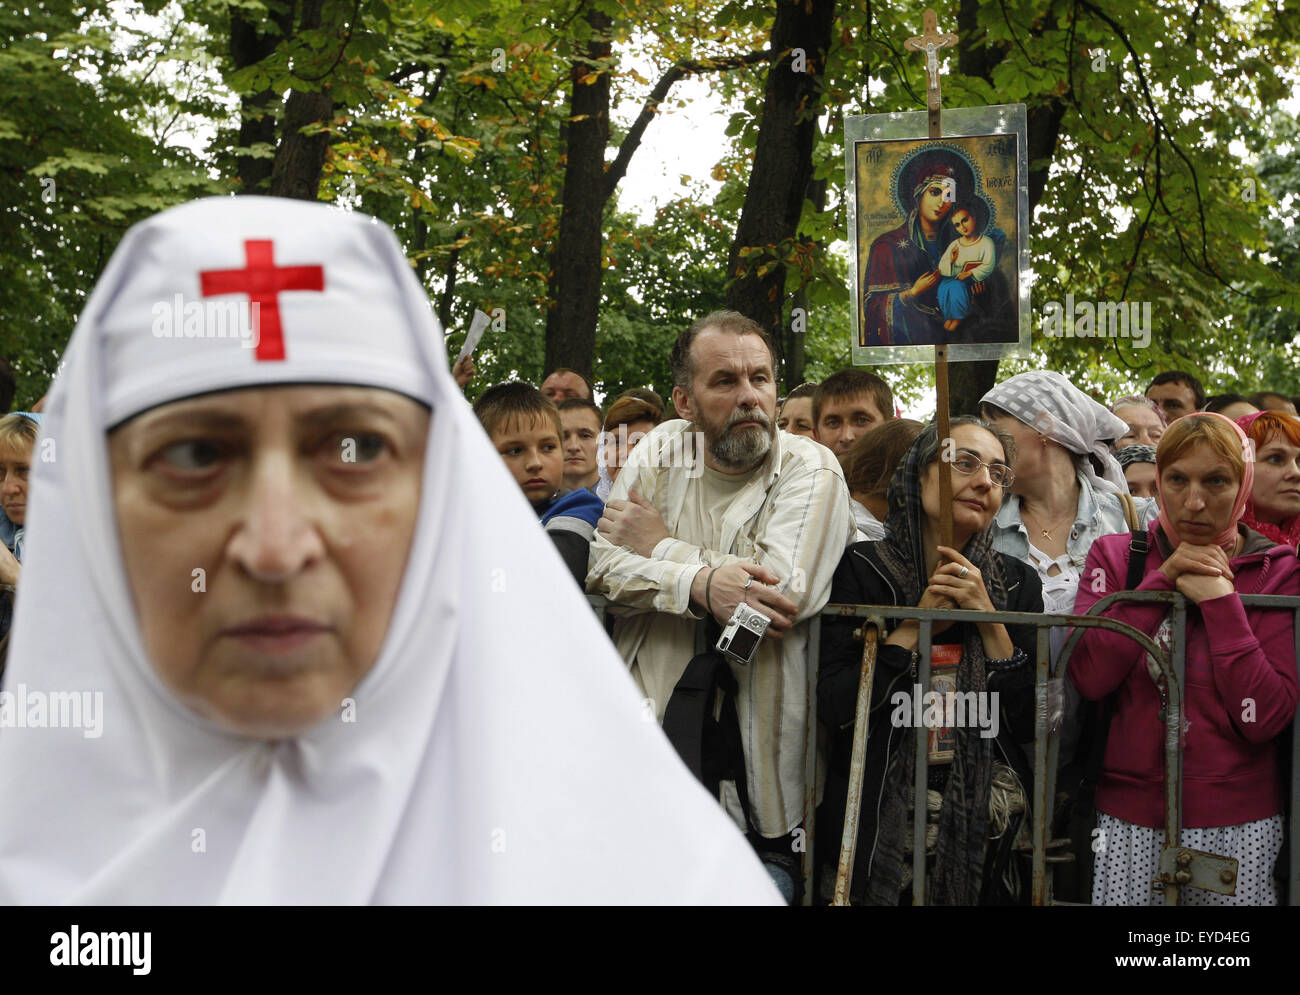 Kiev, Ukraine. 27th July, 2015. Ukrainian nun and believers wait for a prayer service marking the 1000th anniversary of the Repose of Vladimir the Great at St. Vladimirs Hill in Kiev, Ukraine, 27 July 2015. The Grand Prince of Kiev, Vladimir the Great, also known as St. Vladimir, Vladimir the Baptizer of Rus and Vladimir the Red Sun, was the first Christian ruler in the Kievan Rus who christianized the region. Orthodox believers will mark the 1027th anniversary of Kievan Rus Christianization on 28 July. © Serg Glovny/ZUMA Wire/Alamy Live News Stock Photo